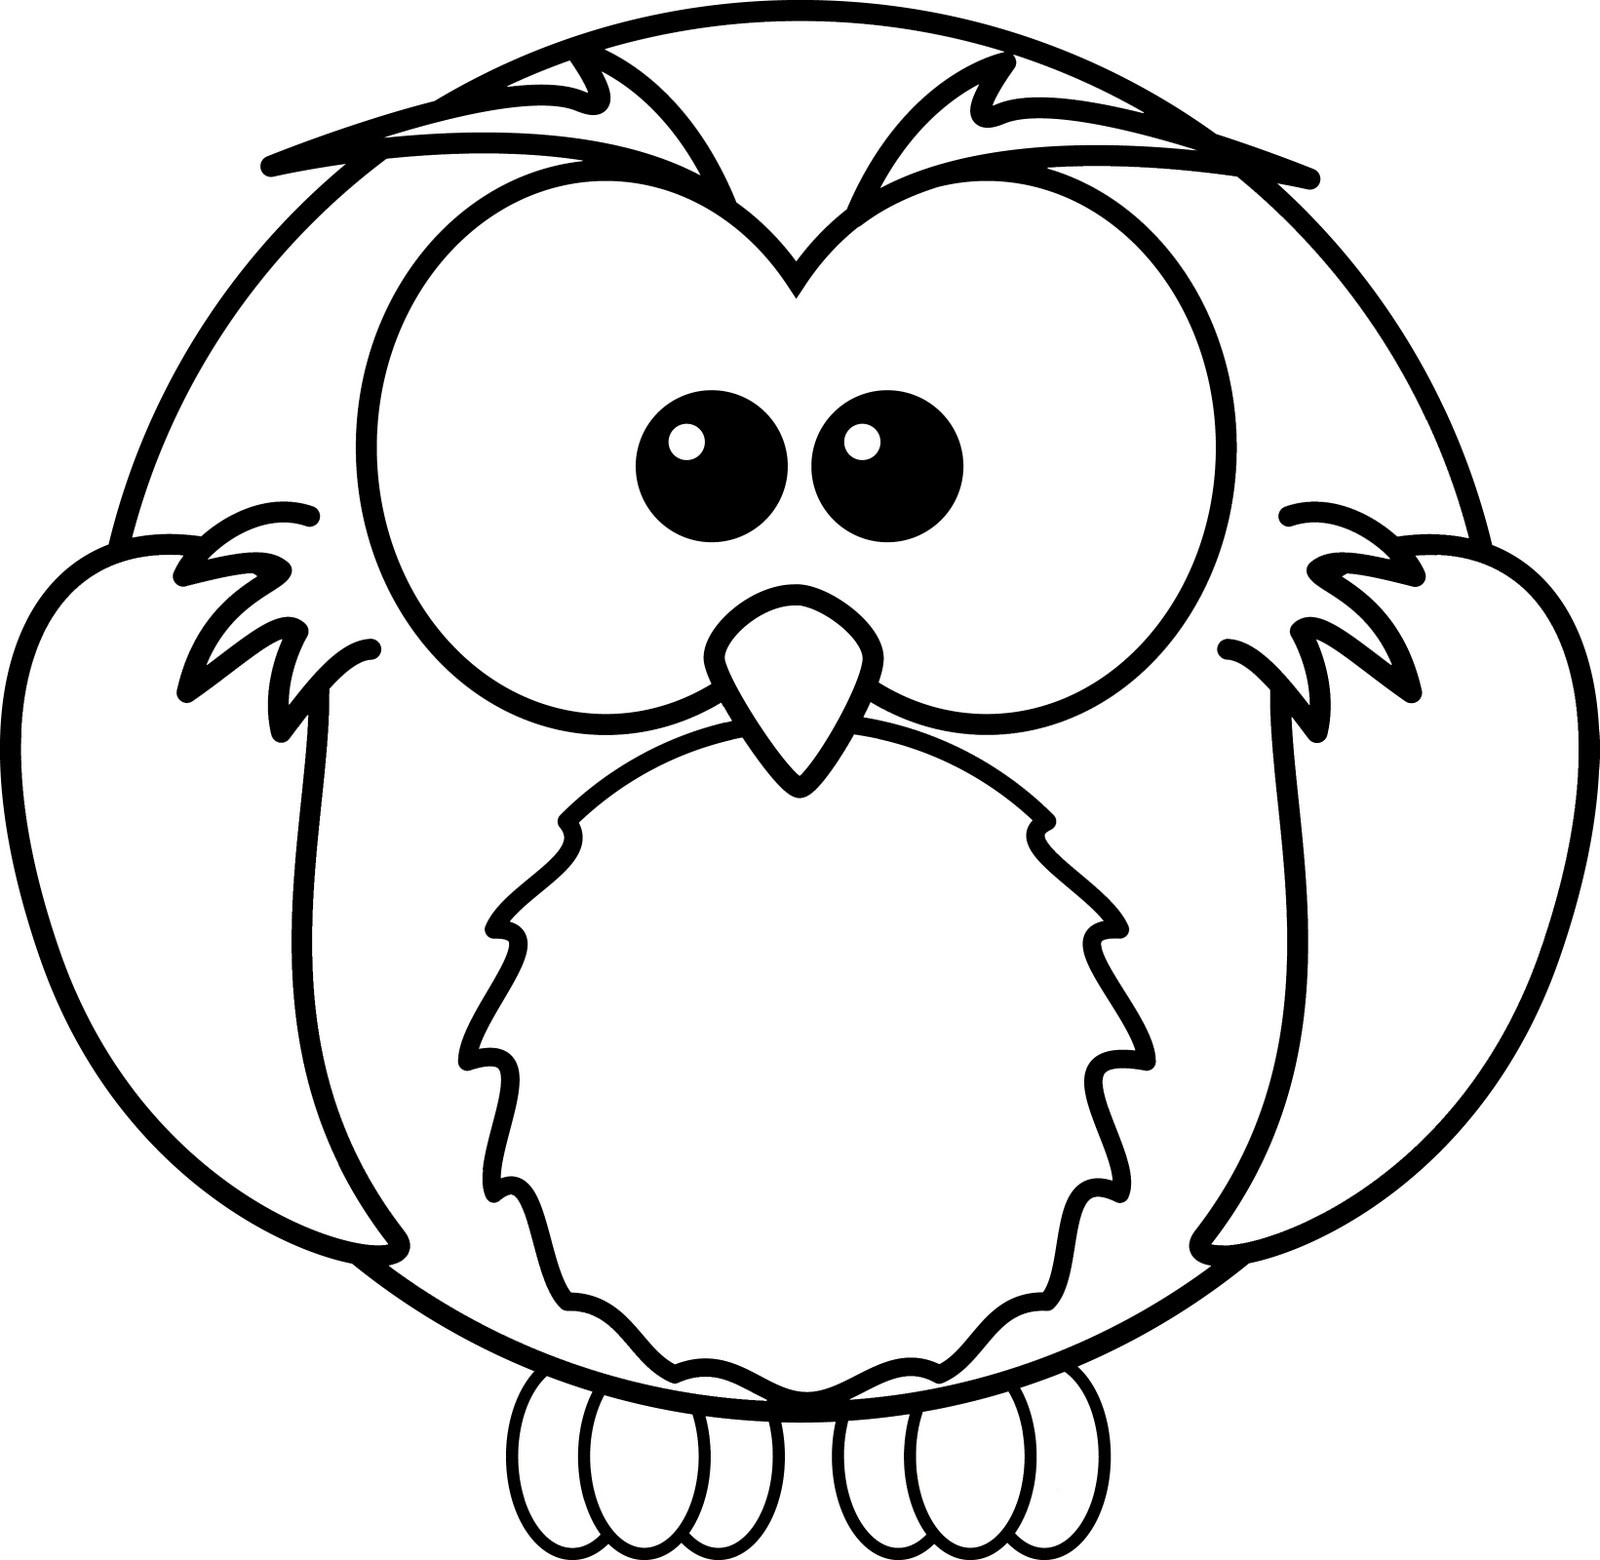 Free Printable Owl Coloring Pages
 Baby Owls Coloring Sheet To Print